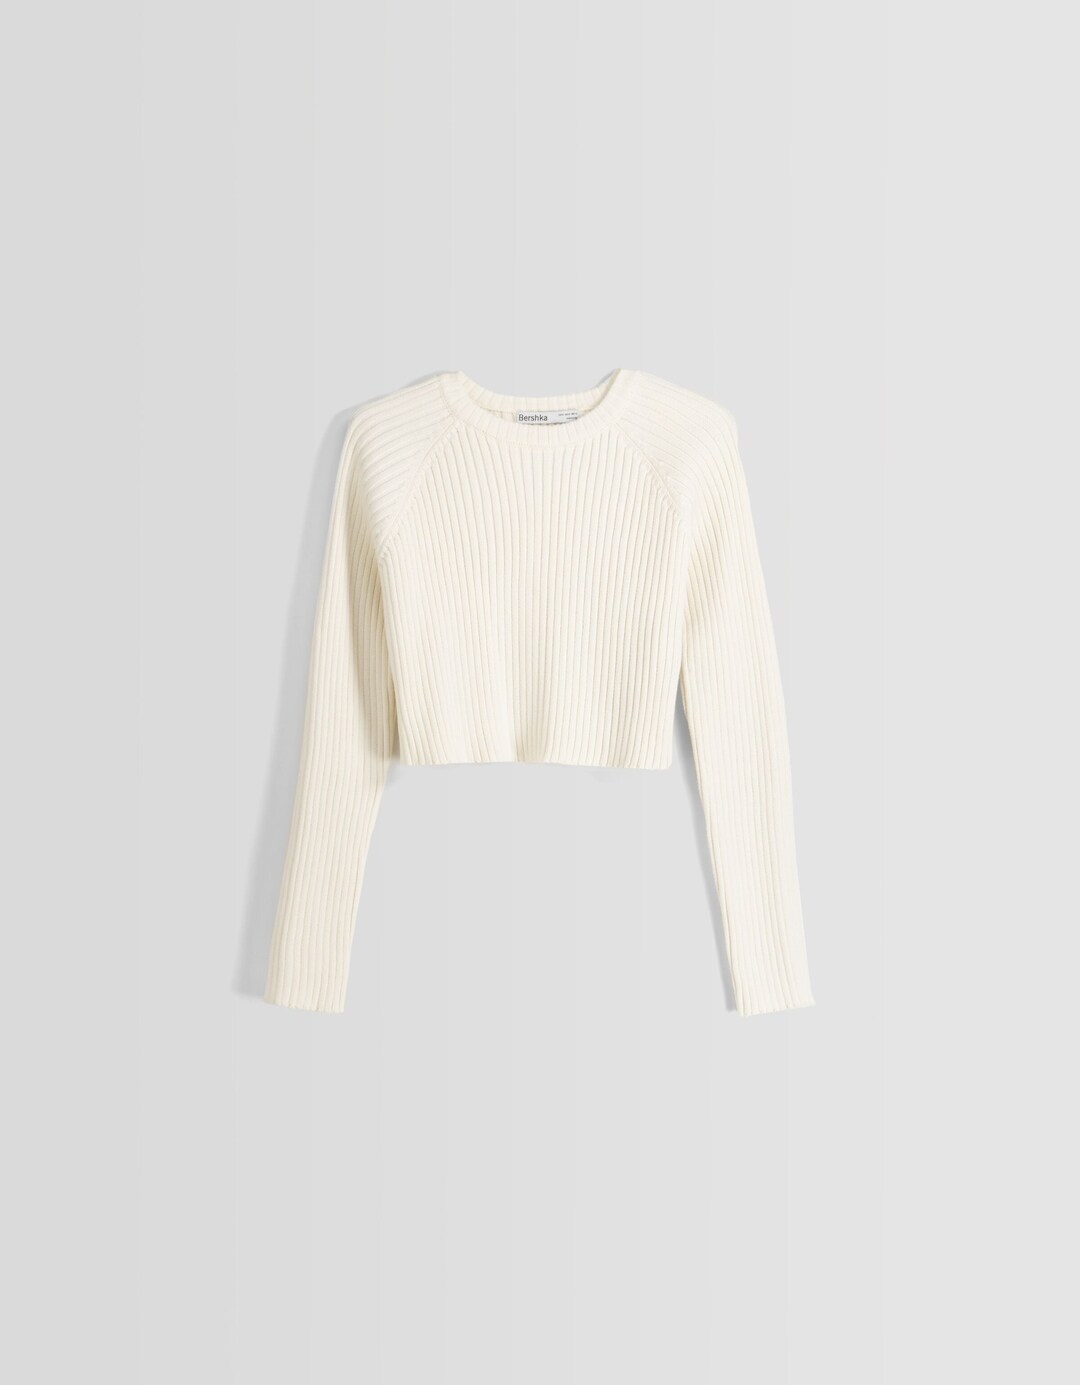 Ribbed knit cotton blend sweater